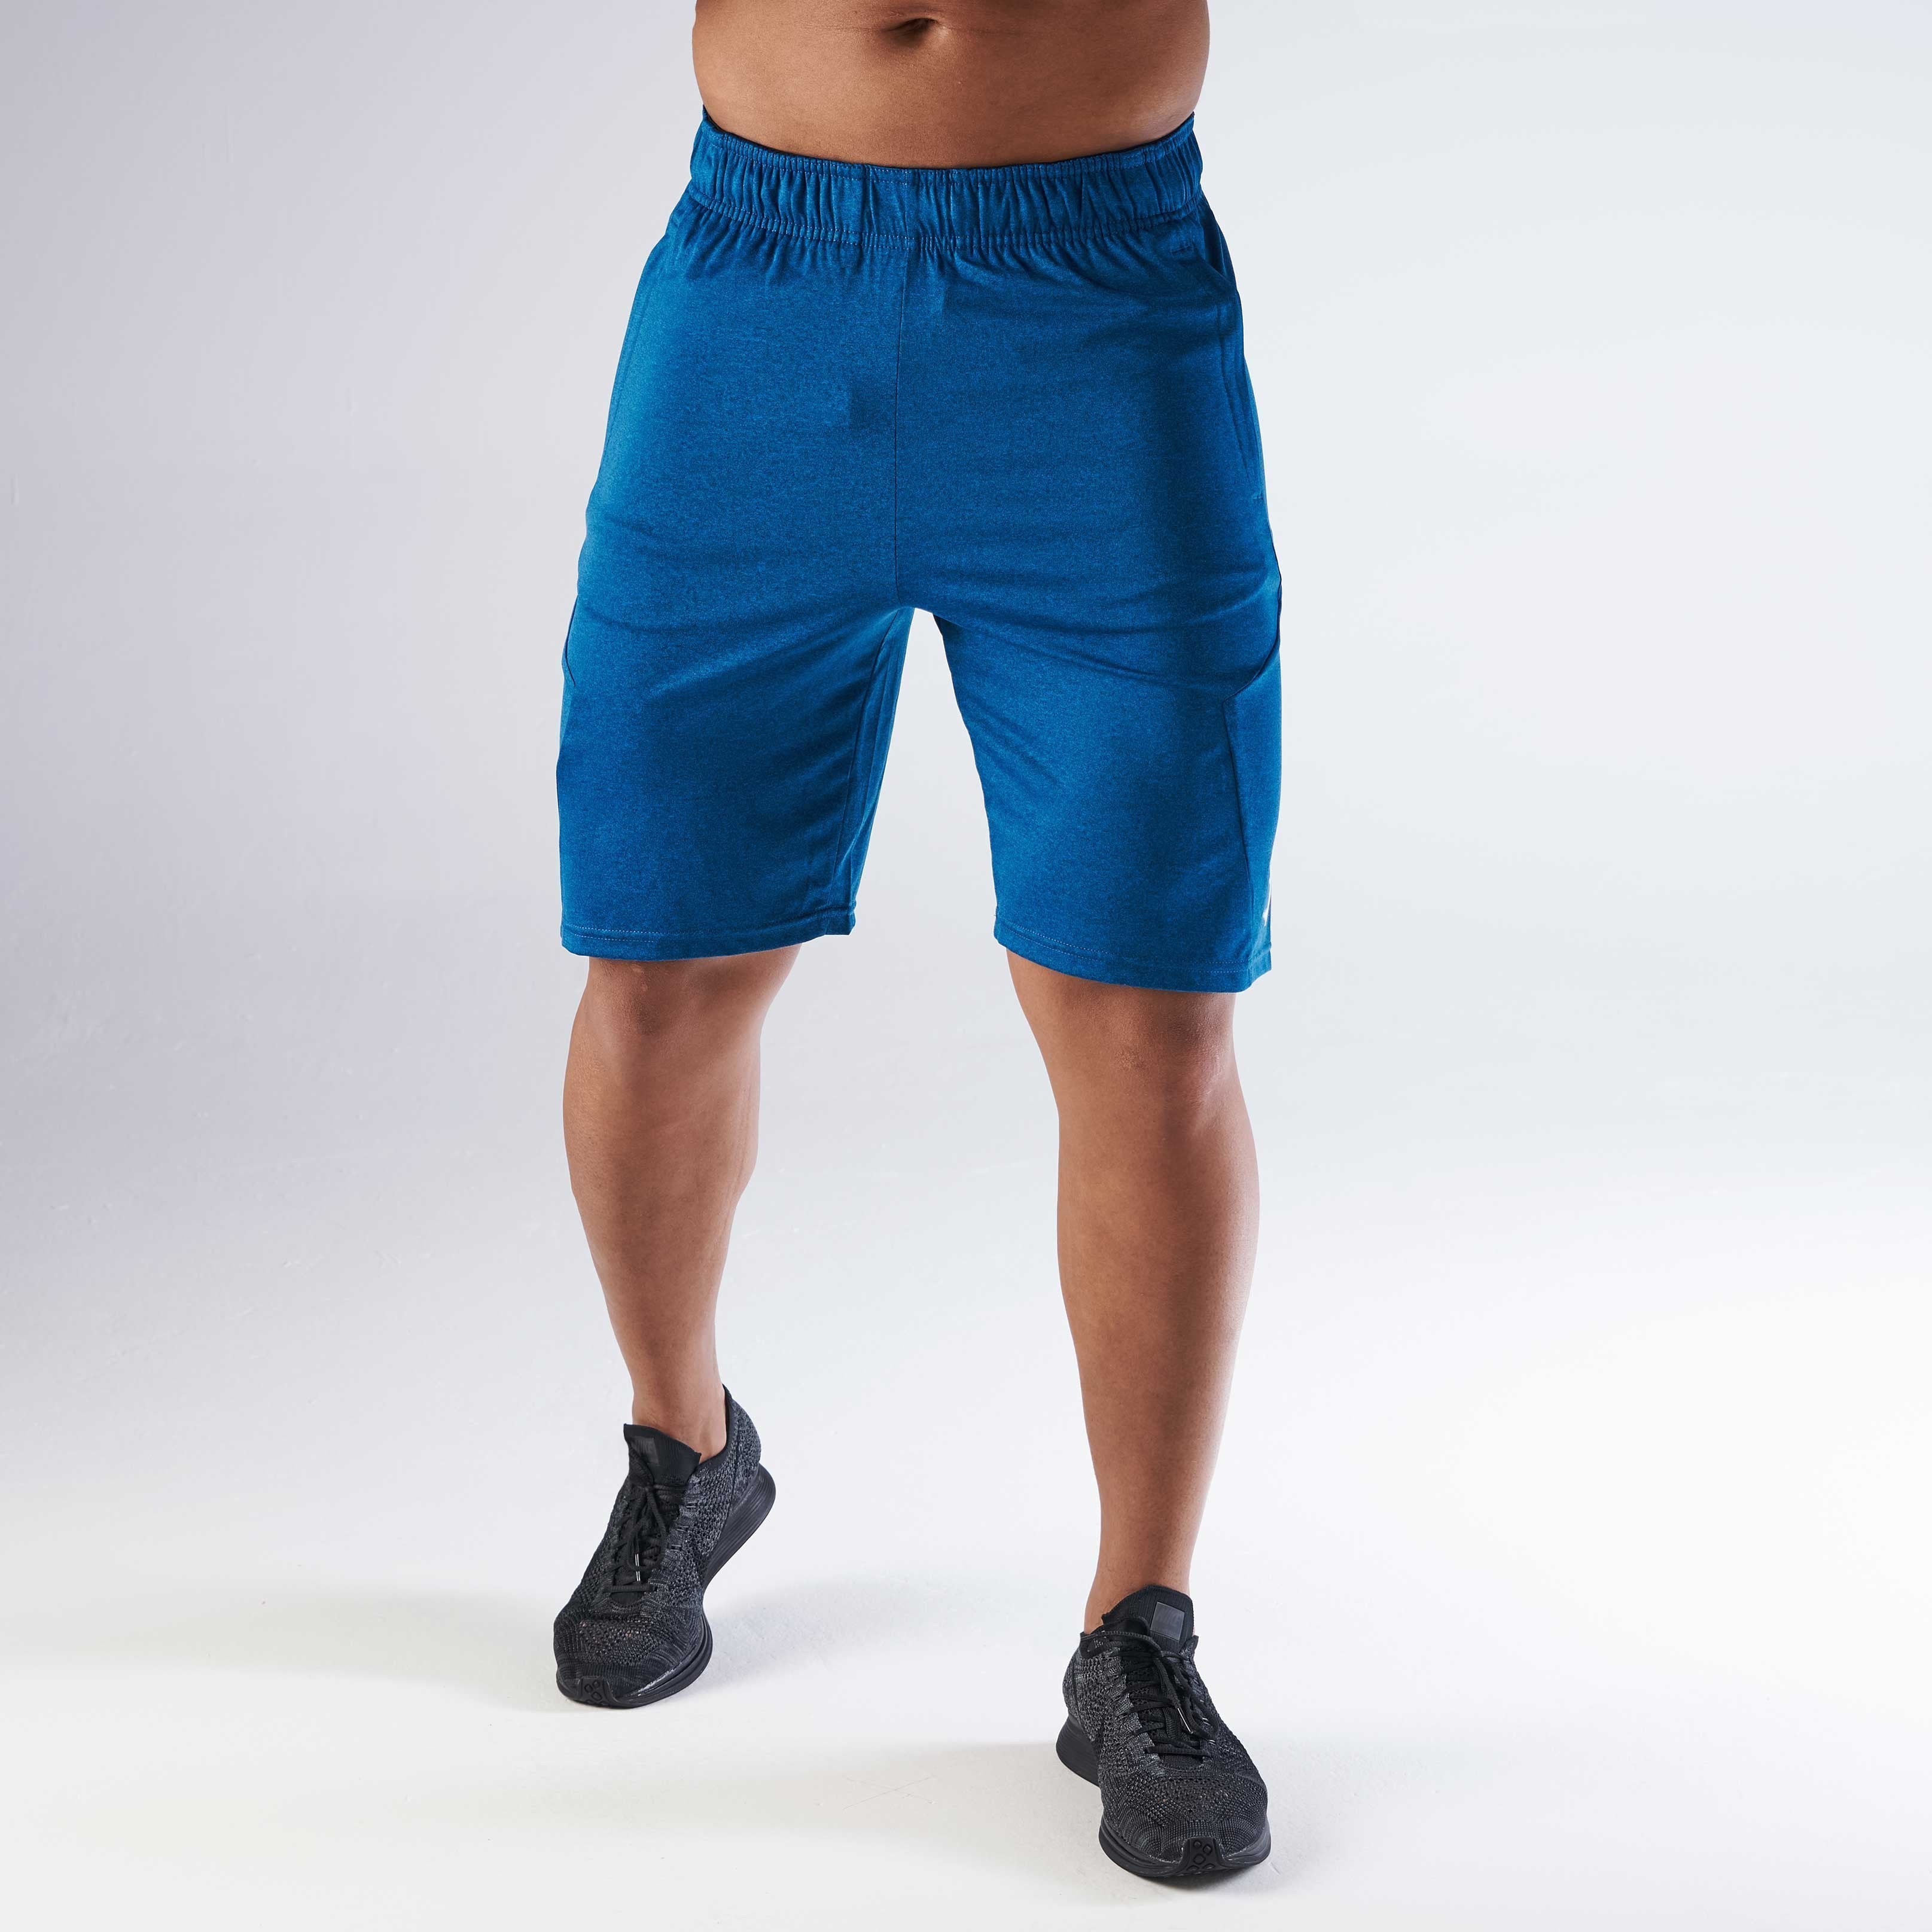 Element Shorts in Dive Blue Marl - view 4